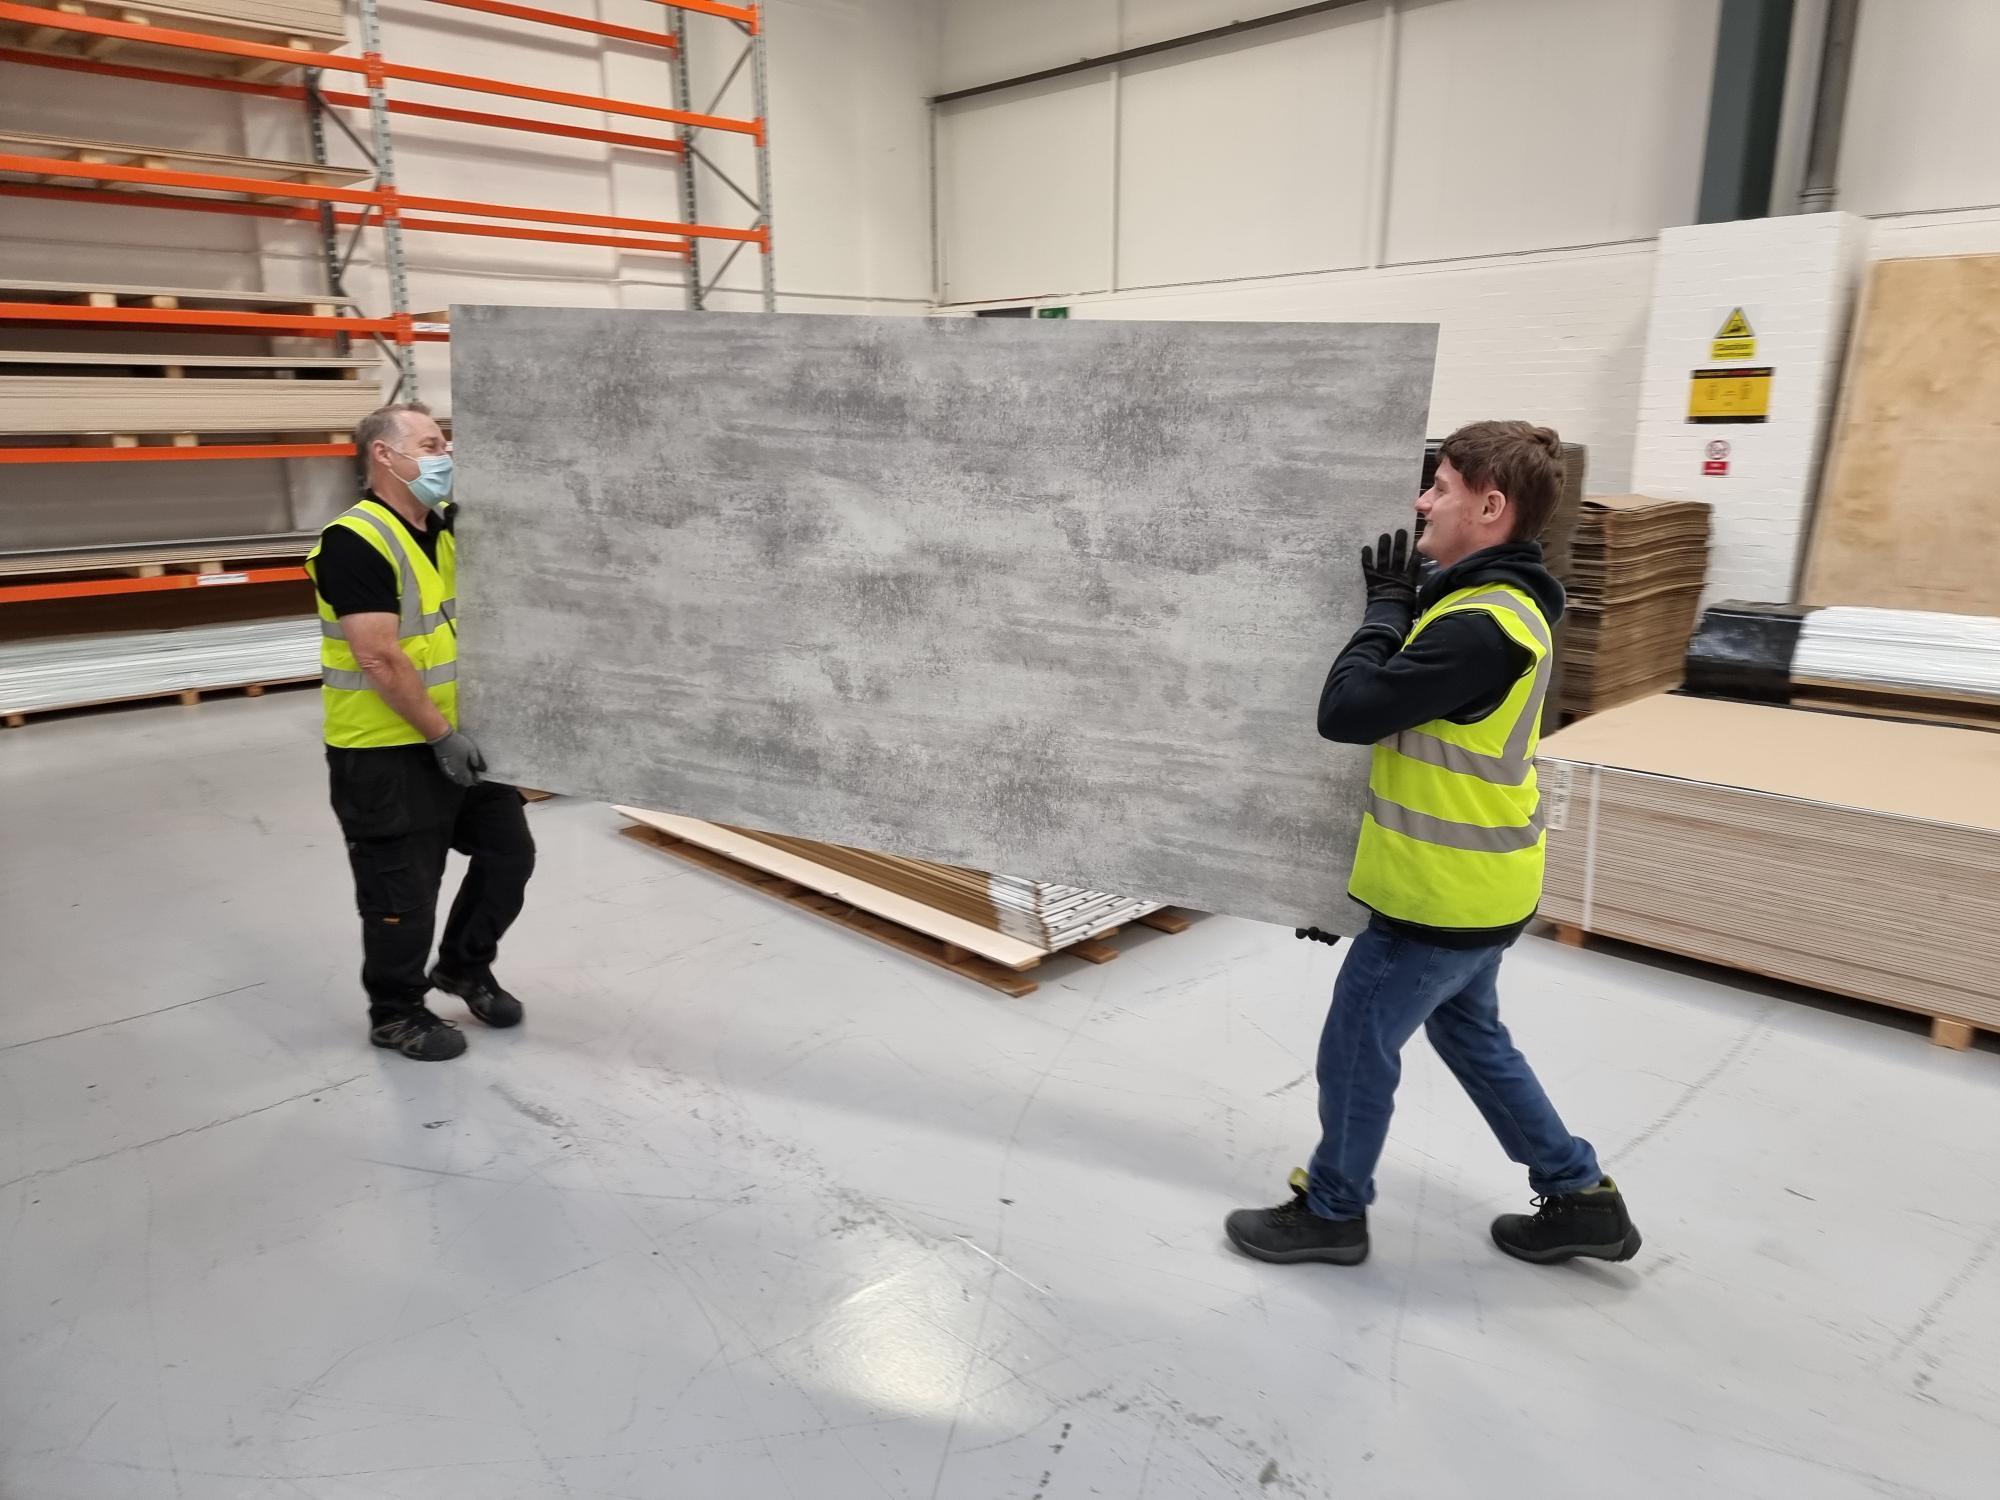 A new Perform Panel being tested by the Donaldson Group